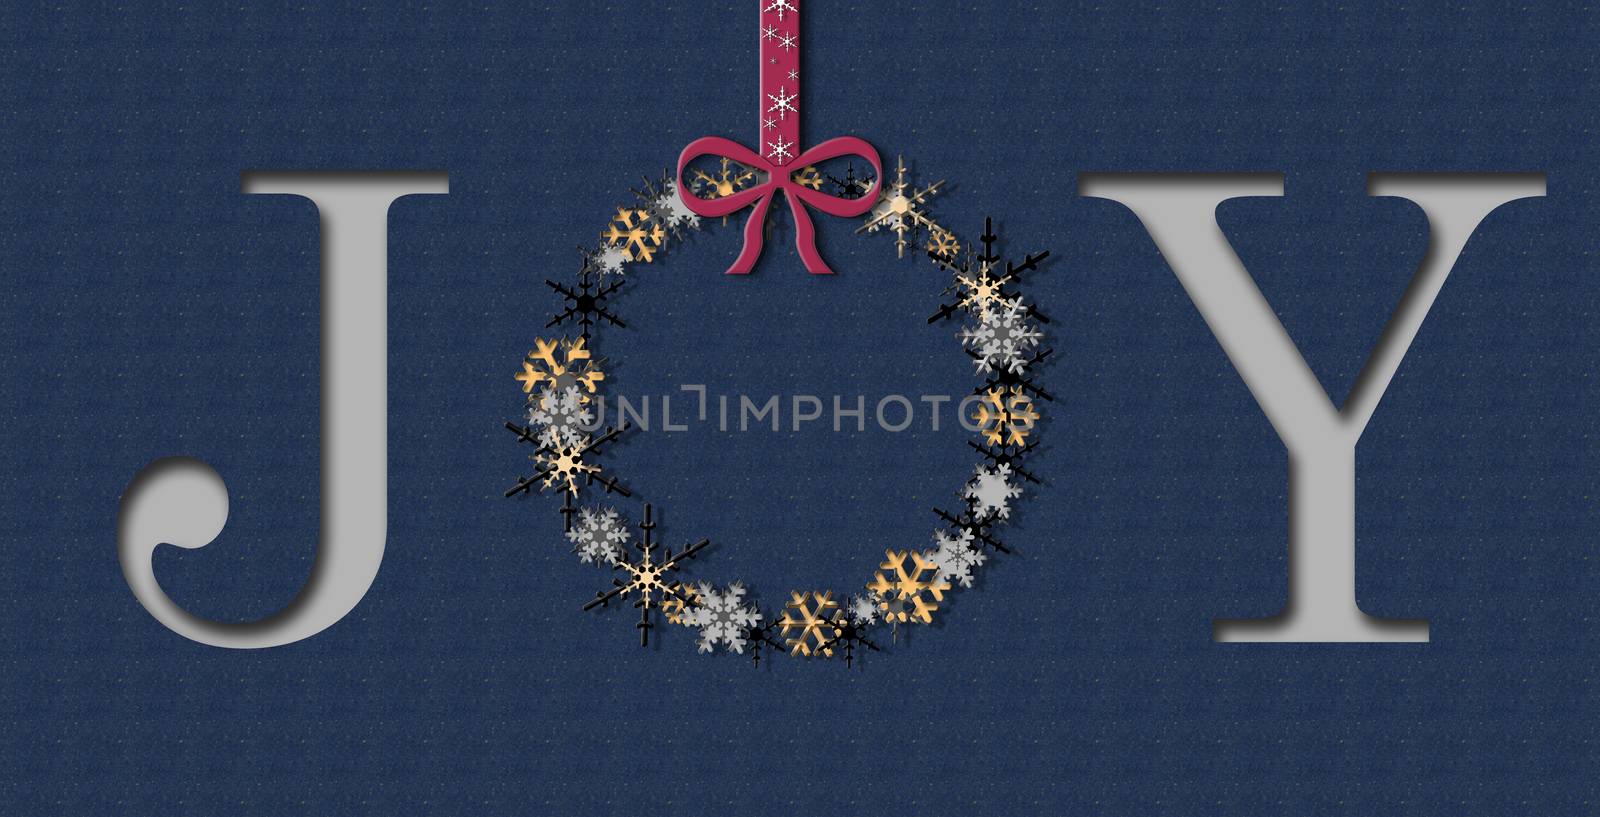 Christmas background with greeting wreath made of snowflakes, word JOY on dark blue background. 3D illustration.